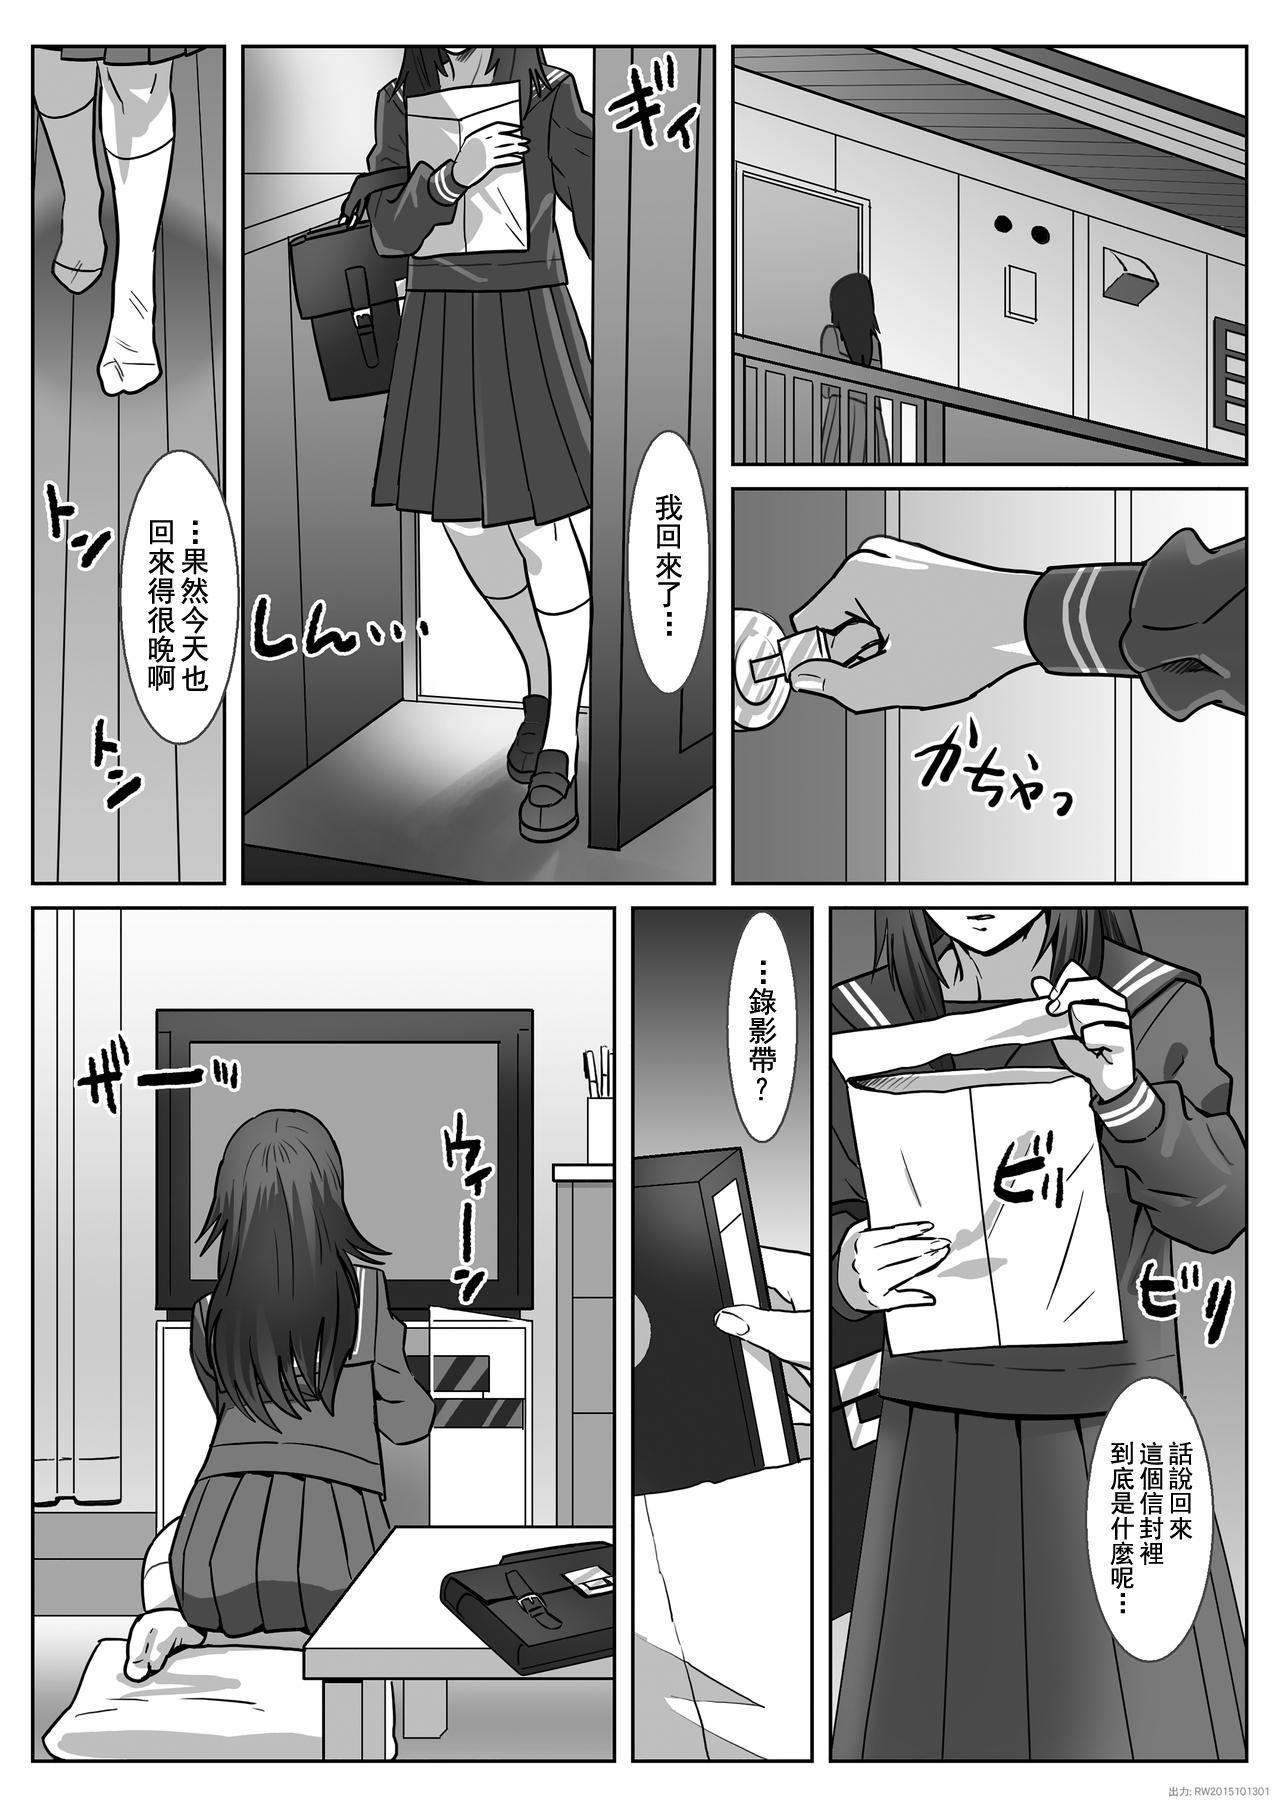 Pinoy [Remora Works] FUTACOLO CO -INHERITANCE- VOL.001 [Chinese] [无毒汉化组] - Original Gapes Gaping Asshole - Page 2